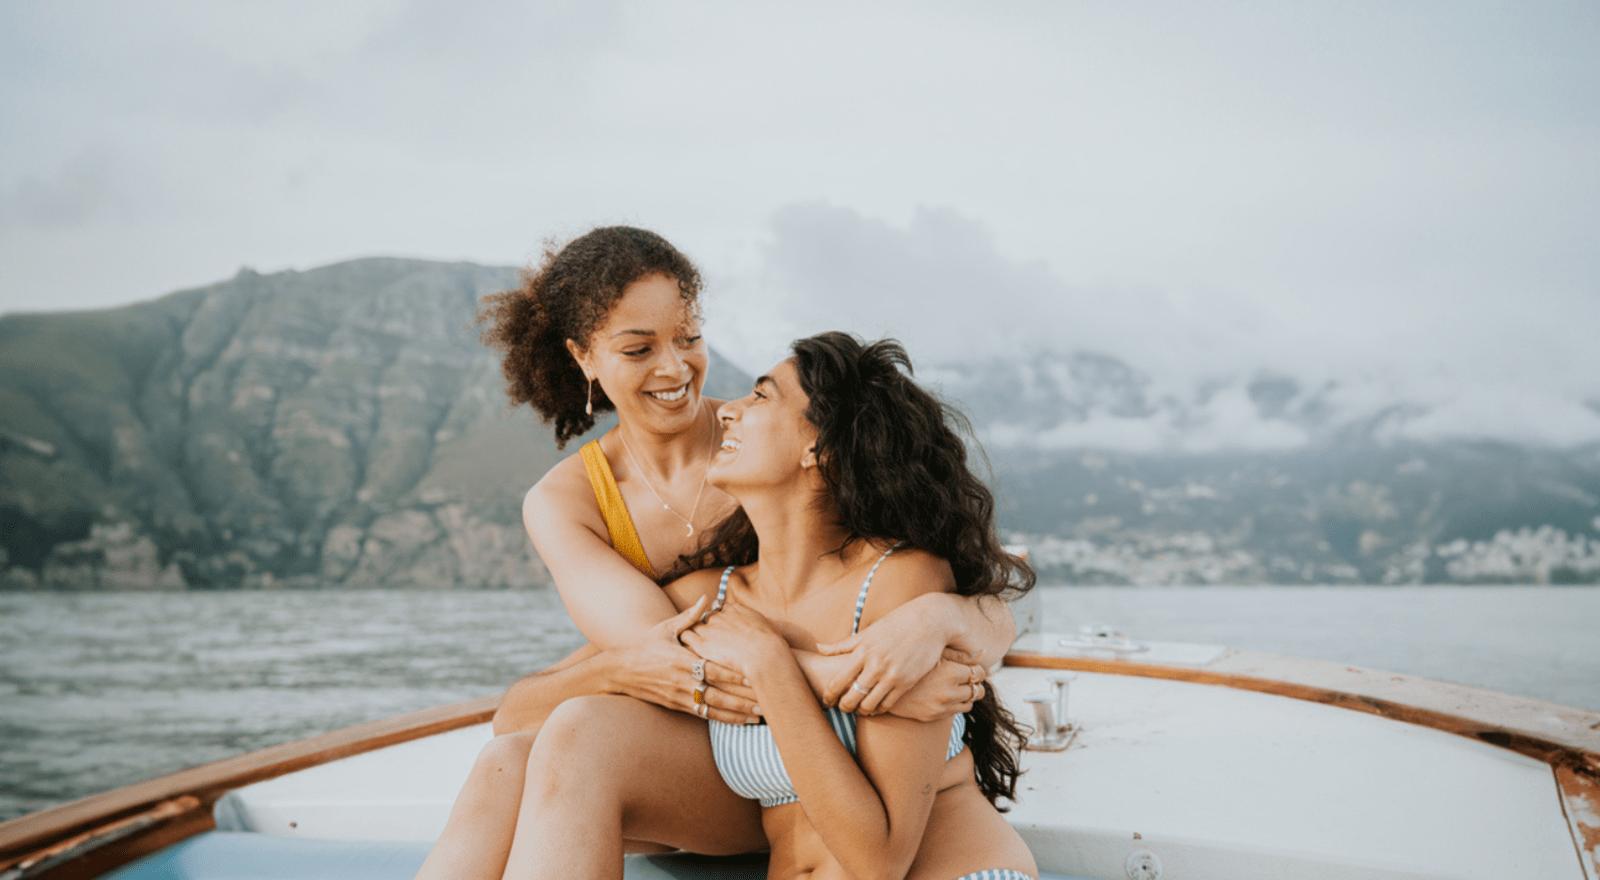 two women embracing and smiling on a boat ride in italy 